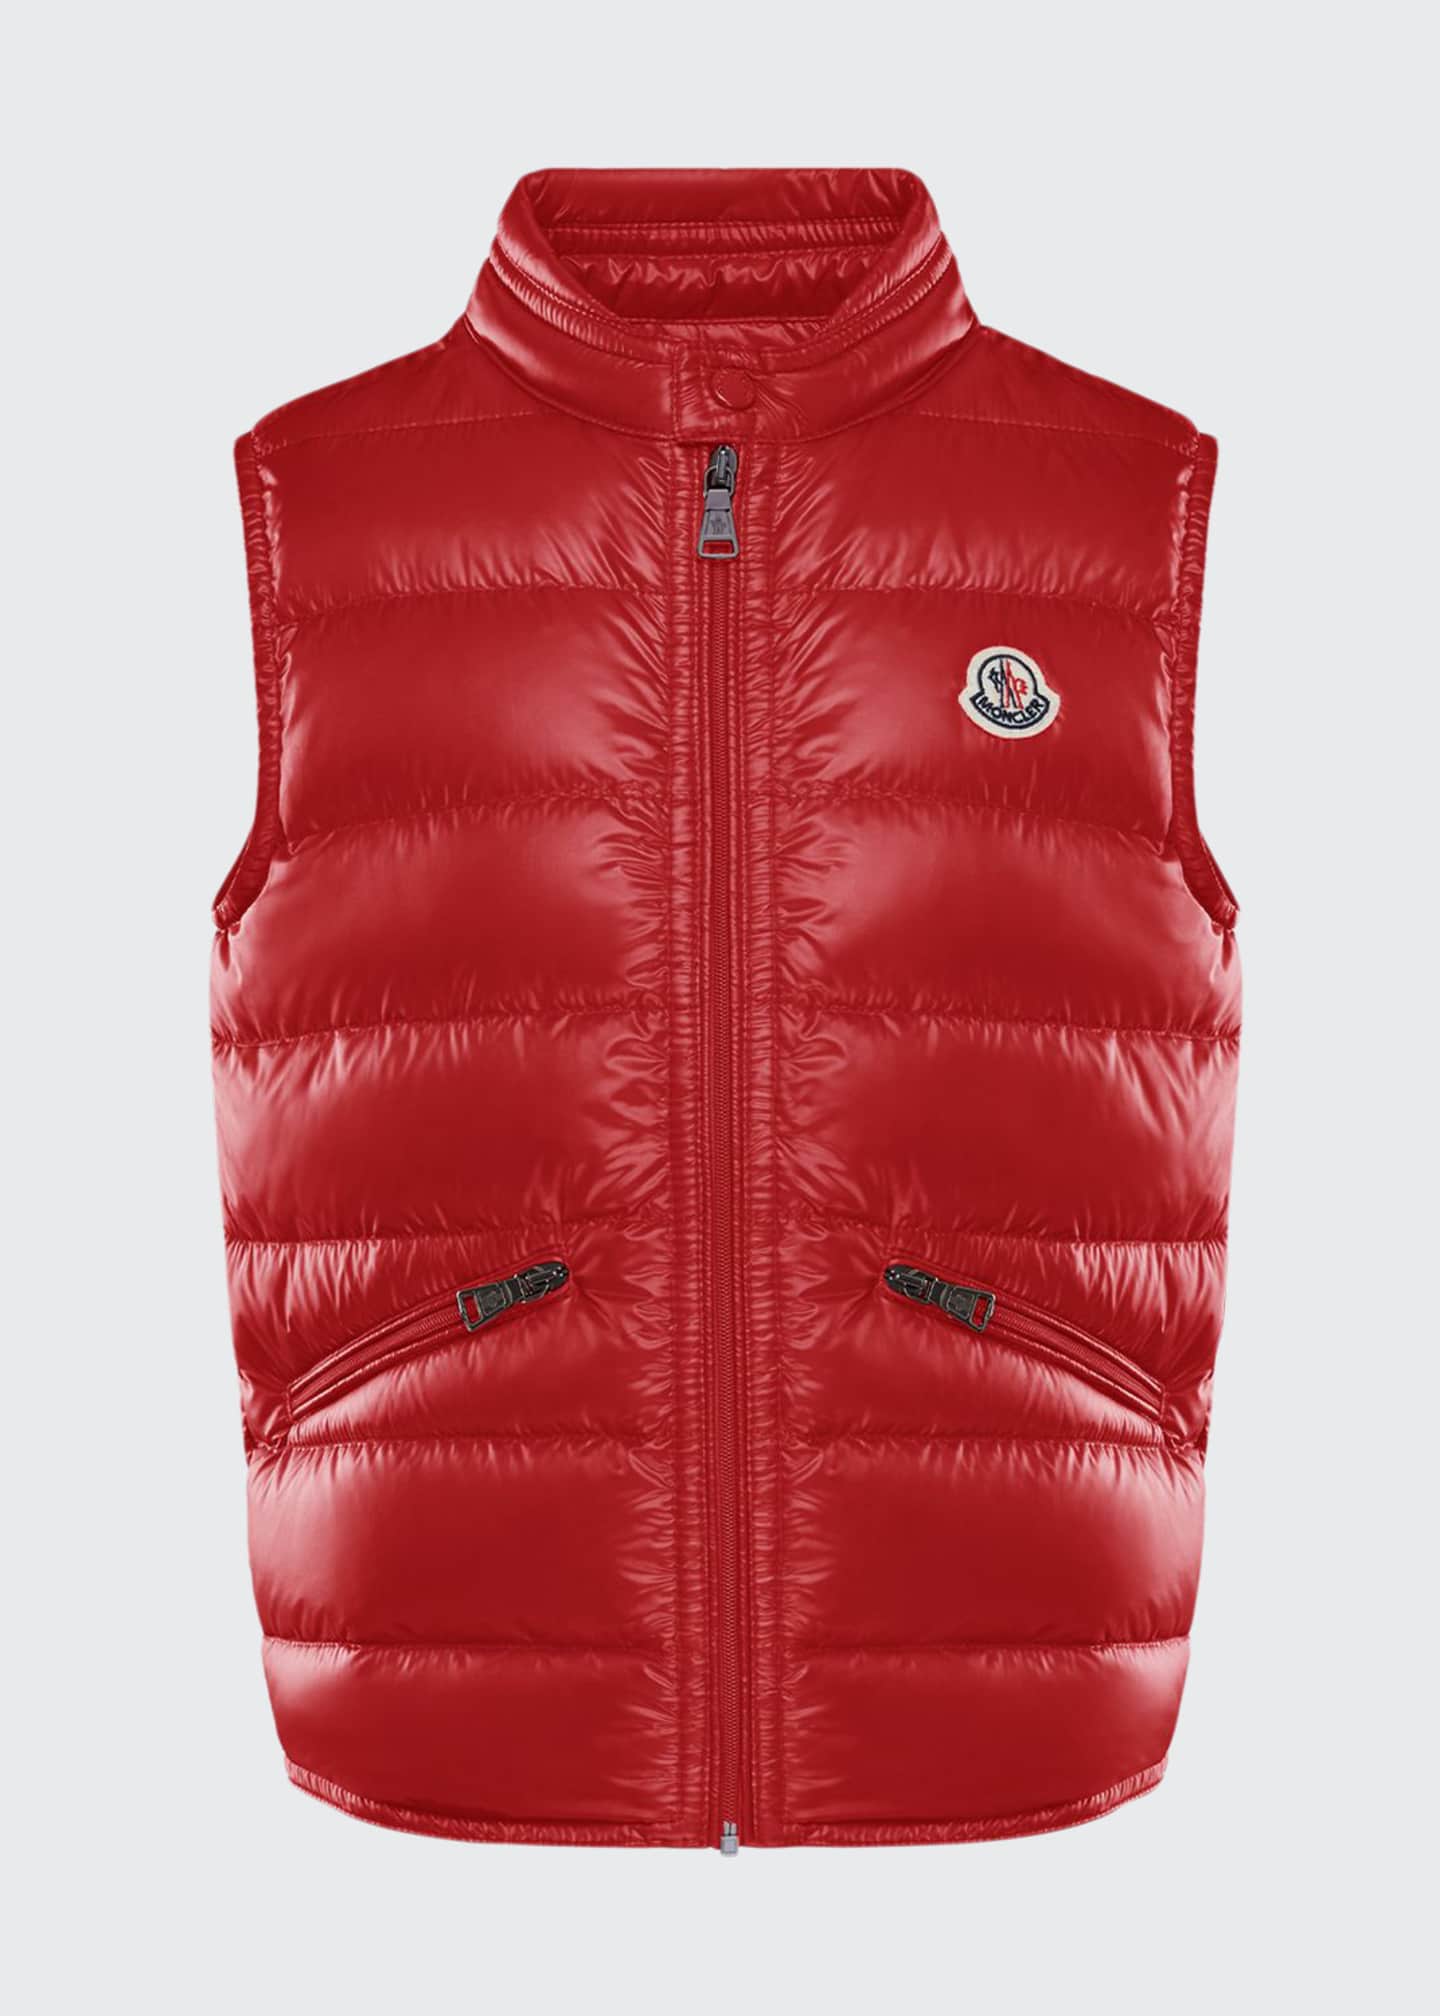 moncler gui red